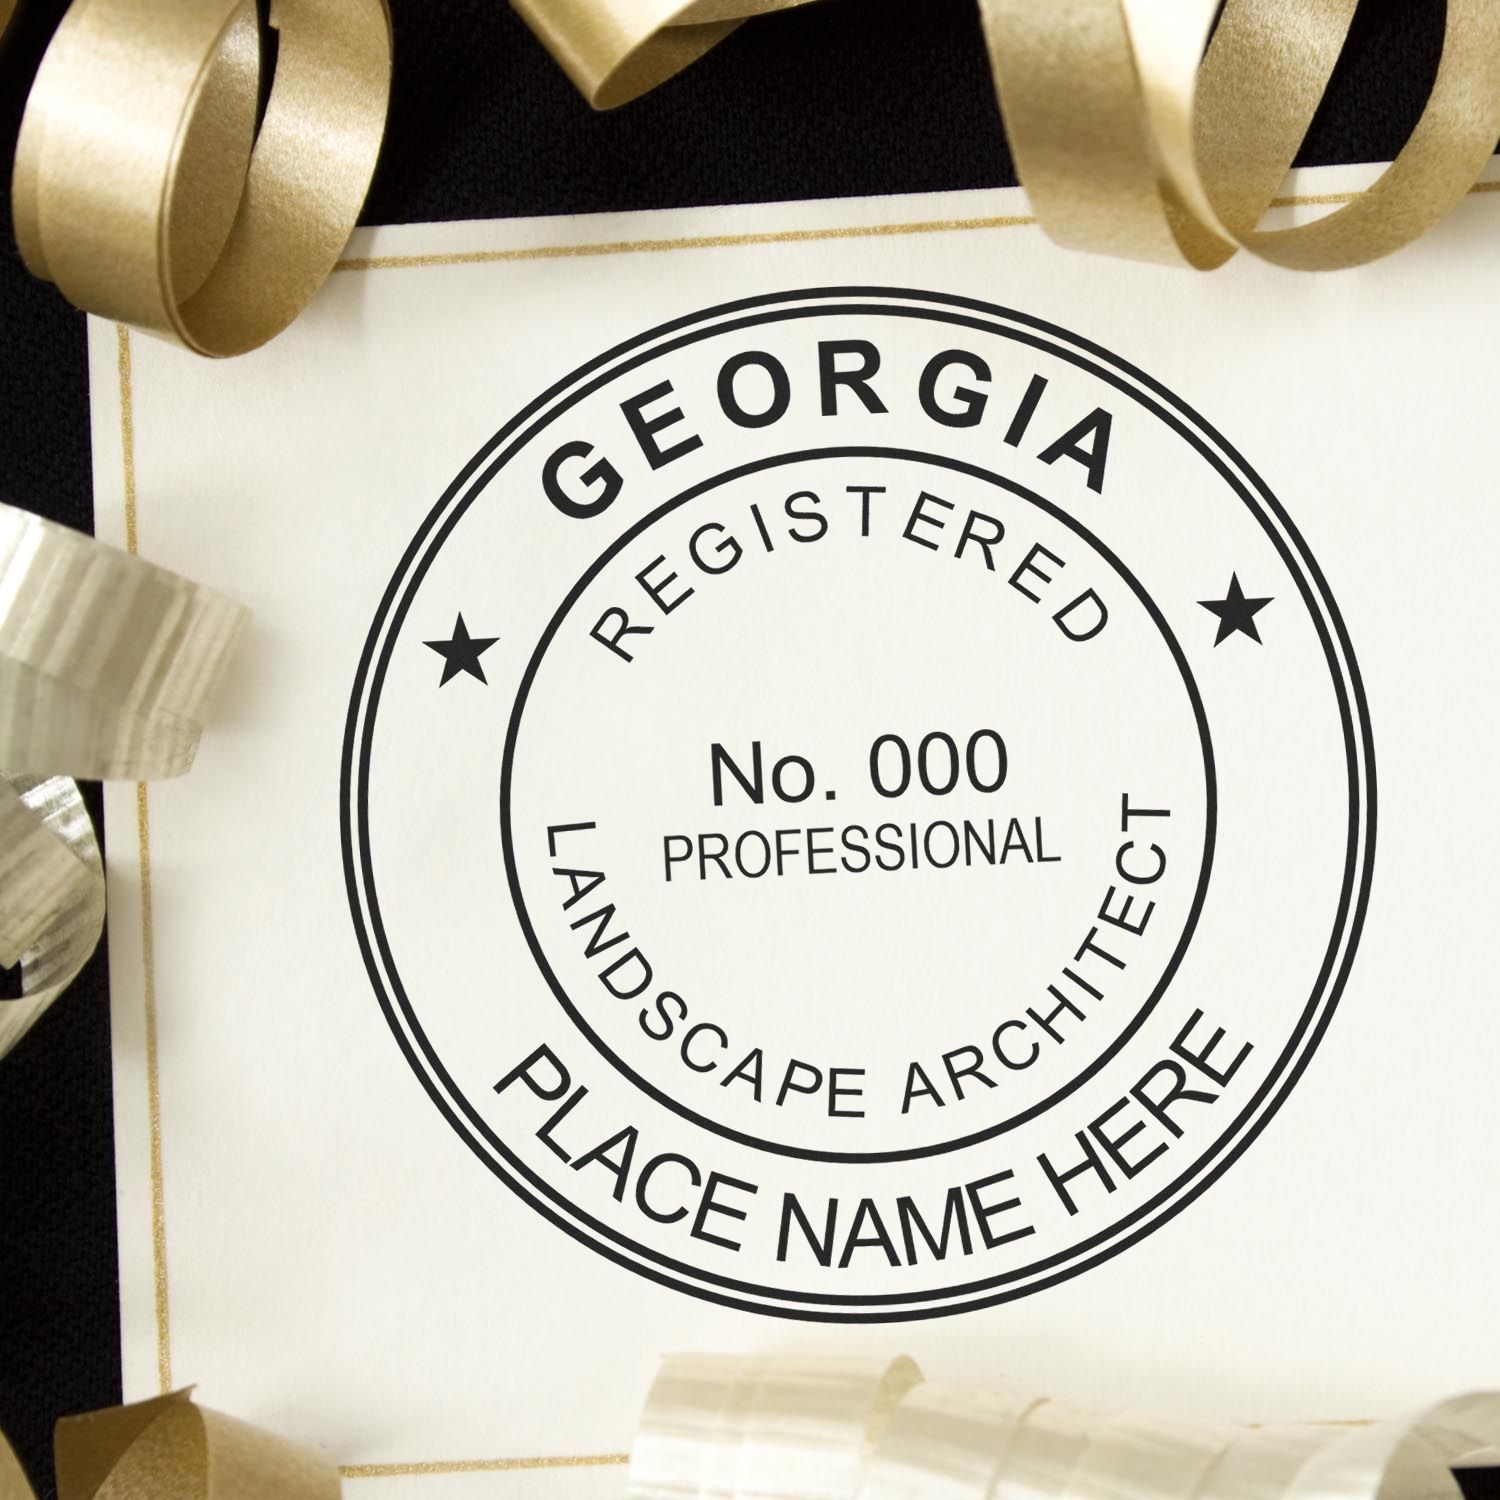 The main image for the Digital Georgia Landscape Architect Stamp depicting a sample of the imprint and electronic files